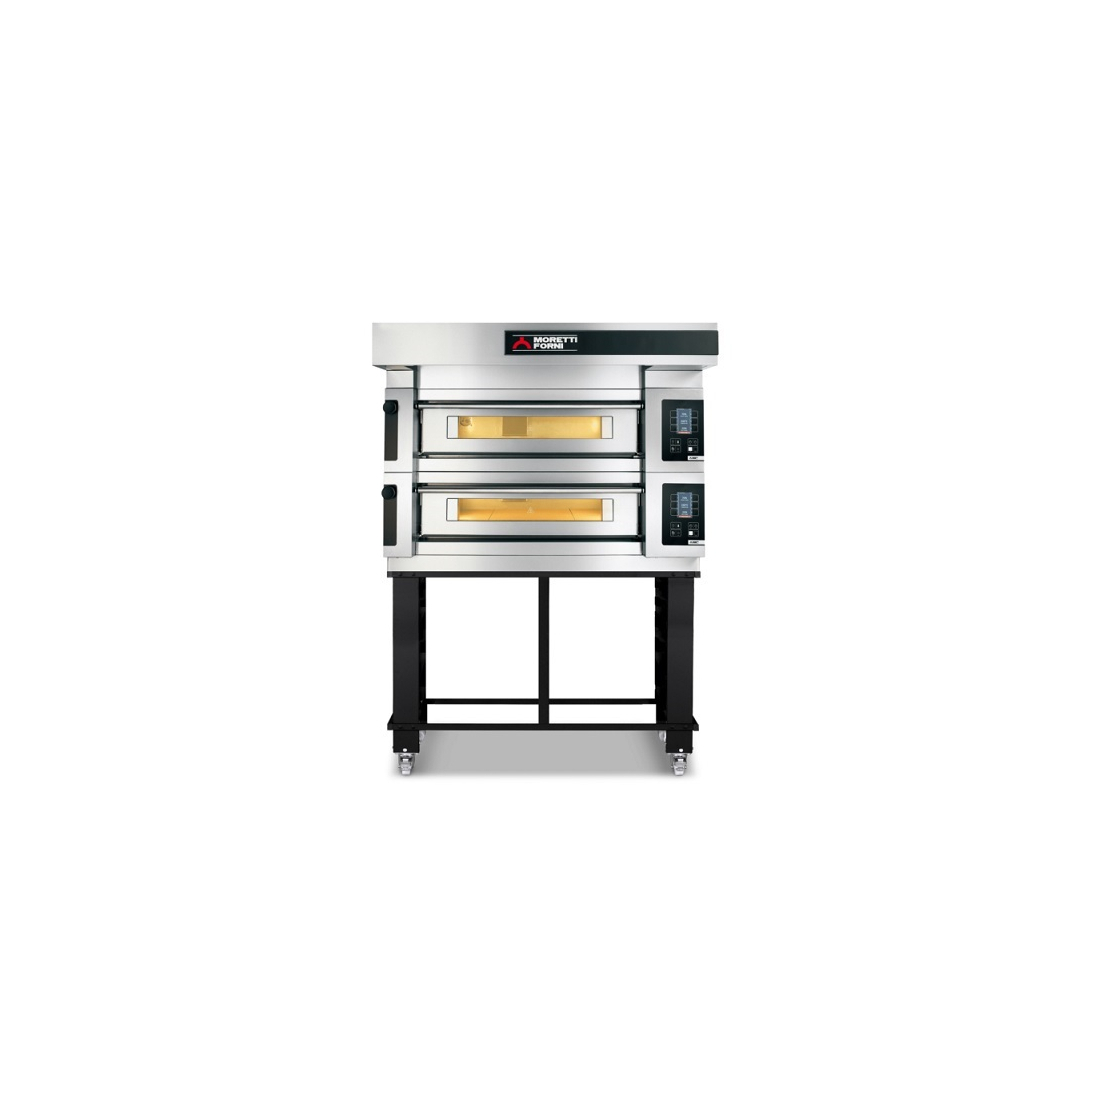 Moretti Forni ,P60E, Two-tier bread, pizza and pastry oven with electric steam on the table